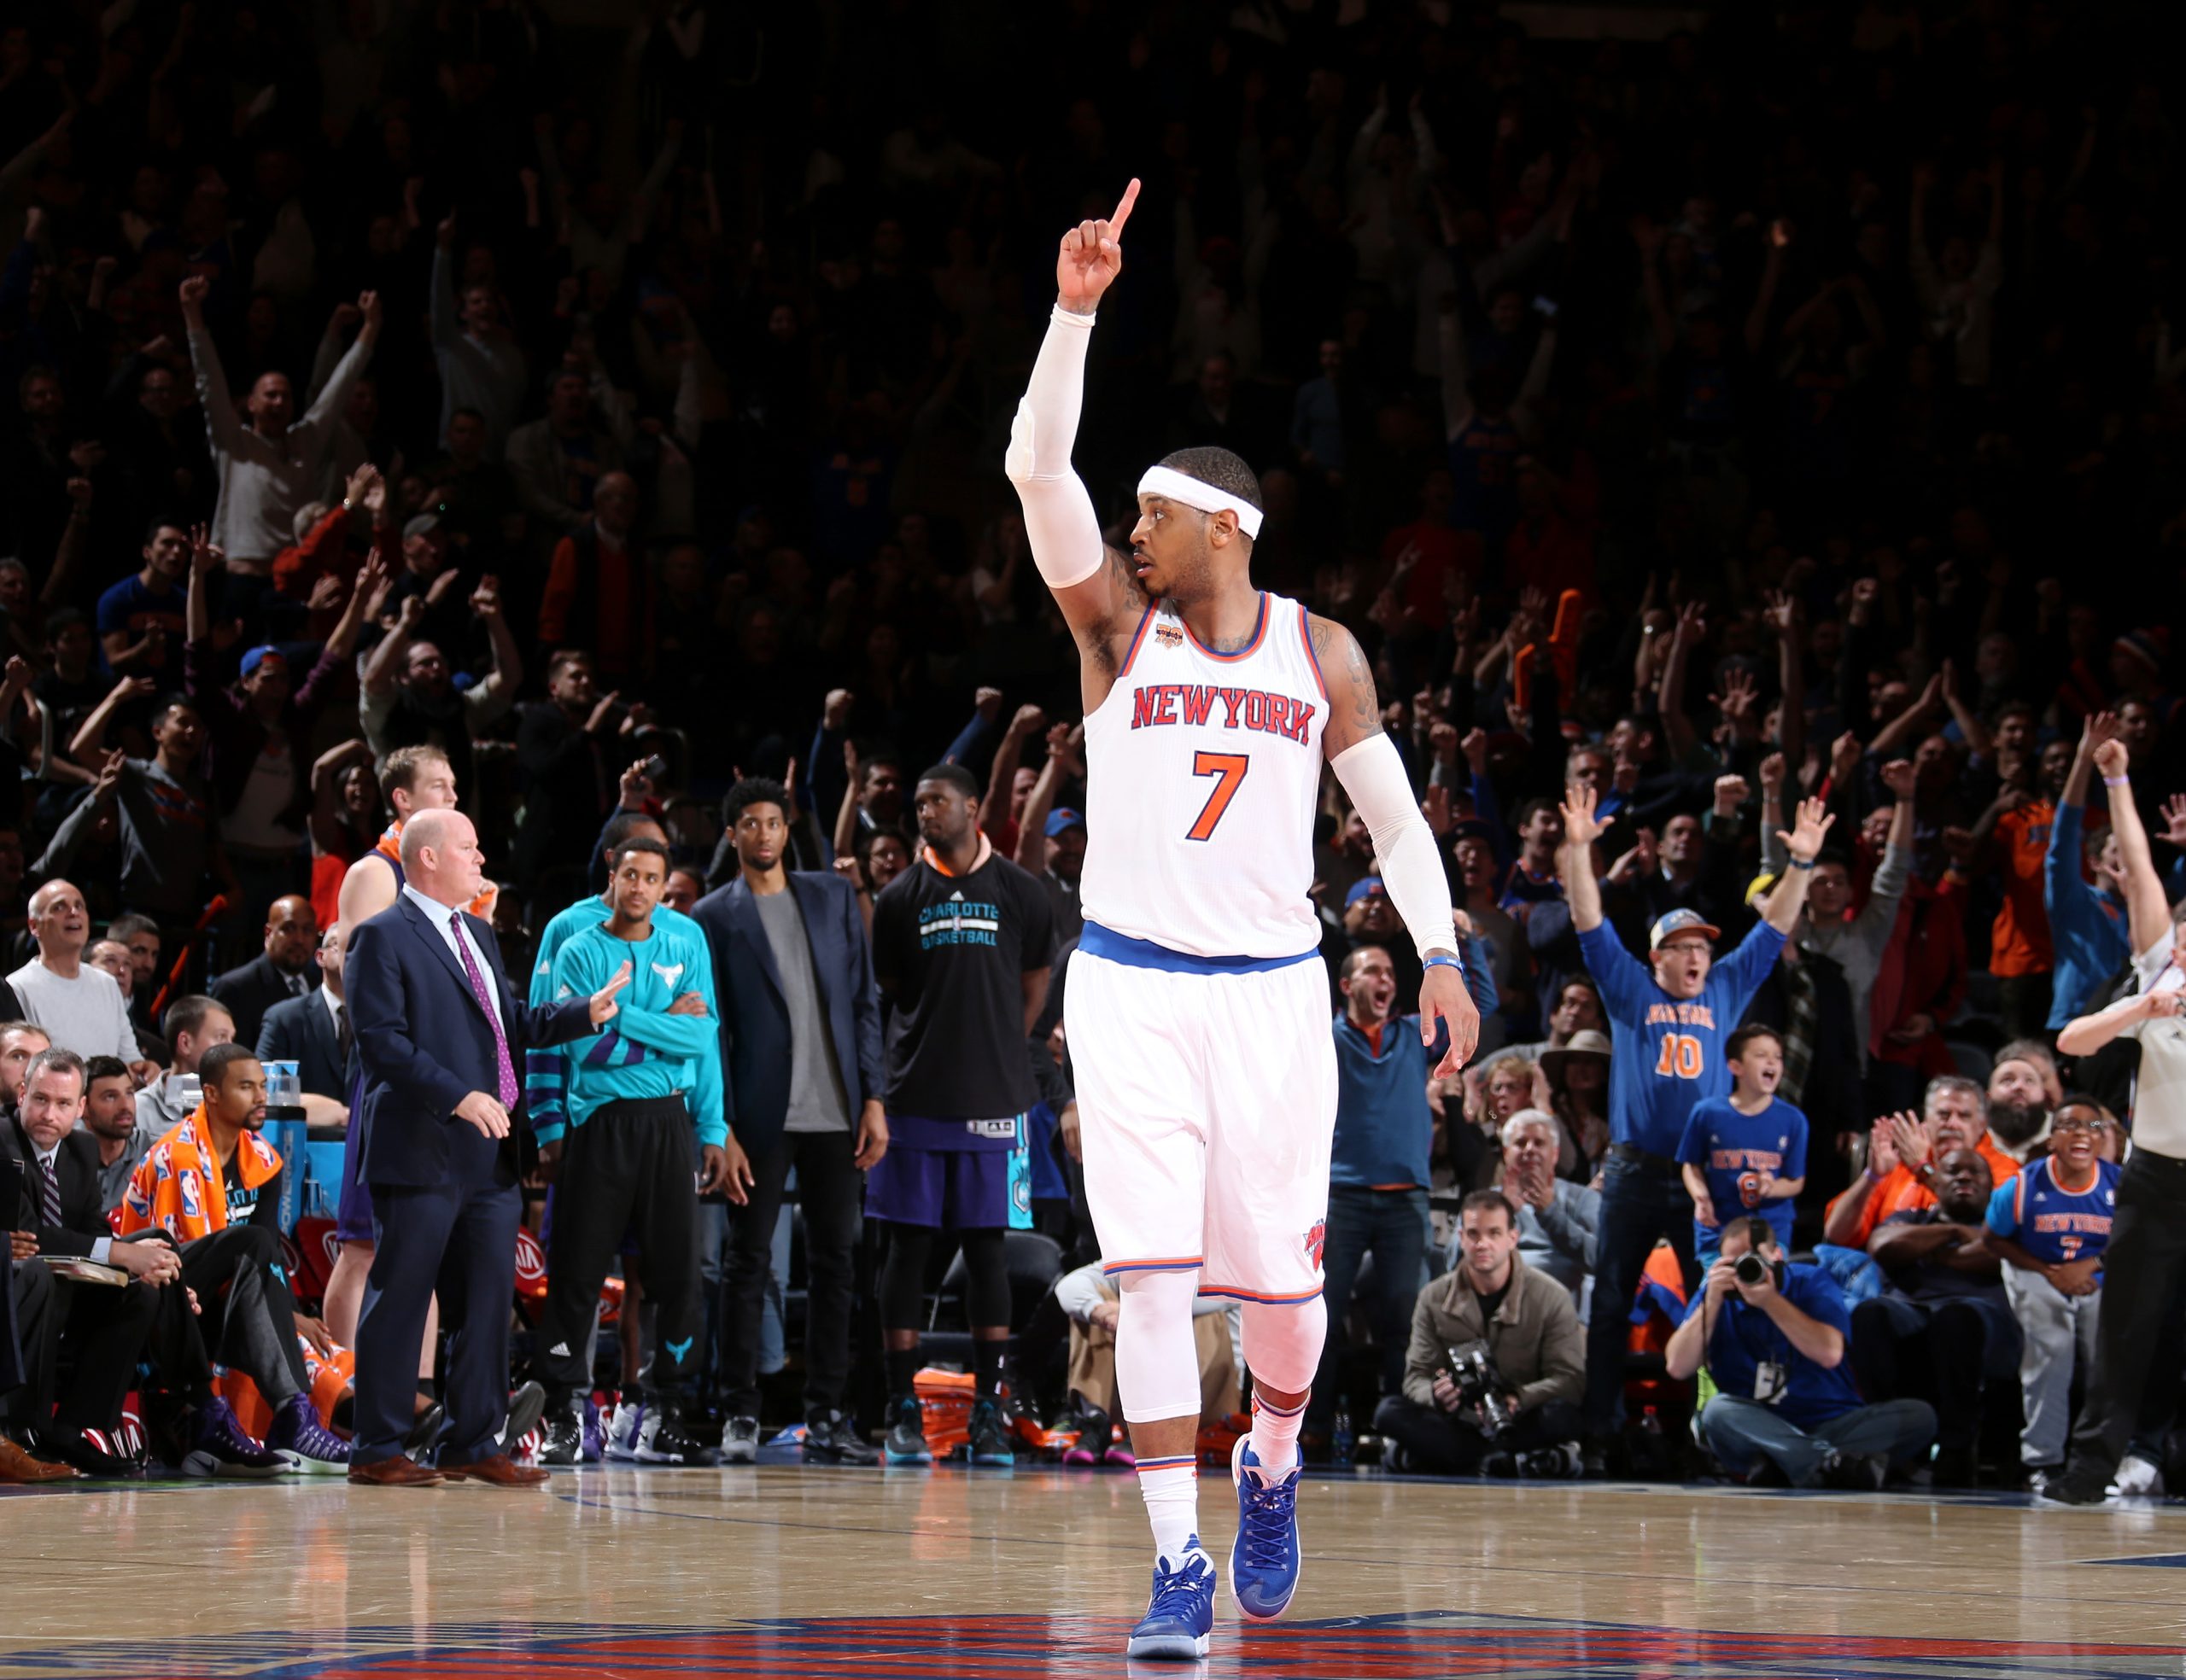 THE 30 PLAYERS WHO DEFINED SLAM’S 30 YEARS: Carmelo Anthony